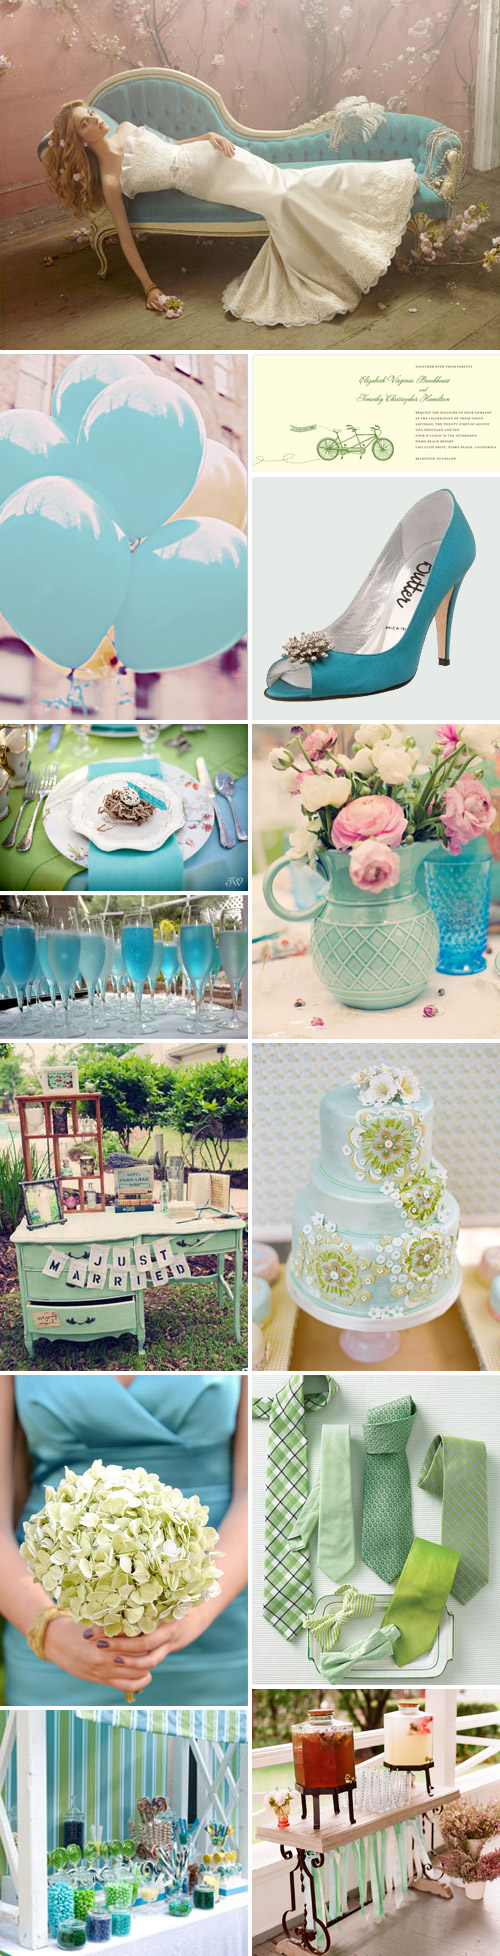 teal-blue-and-green-wedding-inspiration